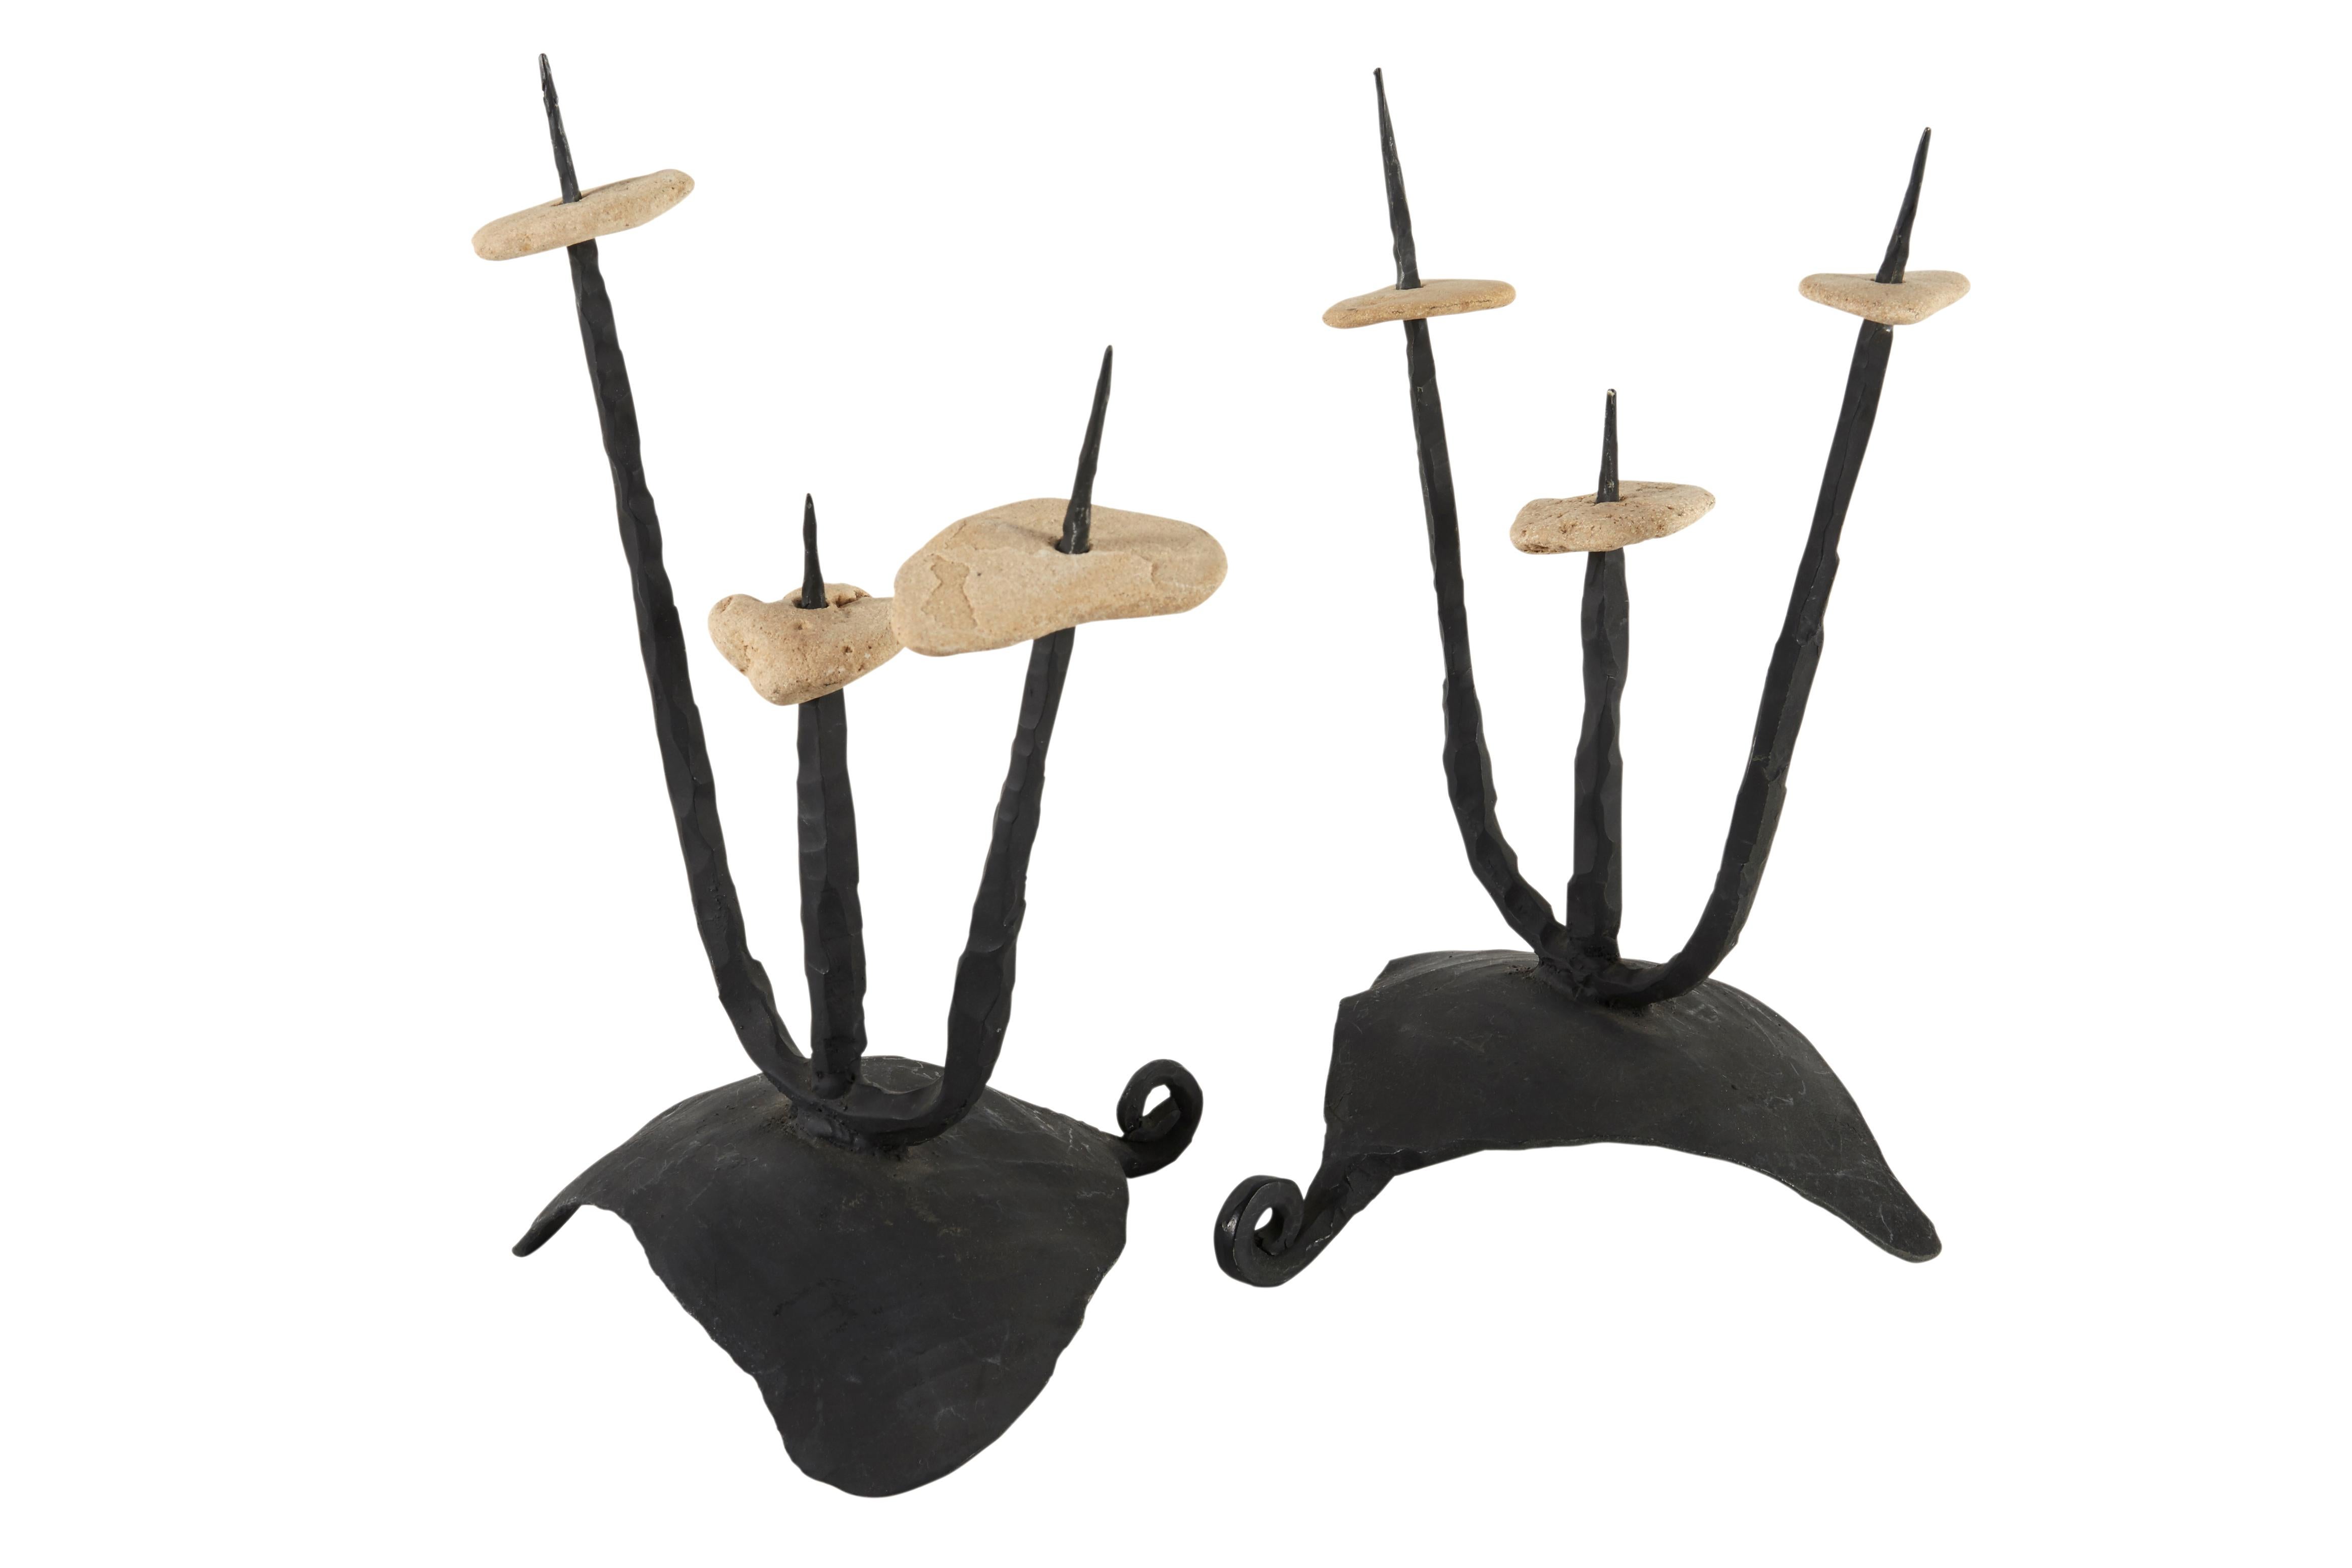 Israeli Mid-20th Century Pair of Brutalist Candleholders/Sculptures by David Palombo For Sale